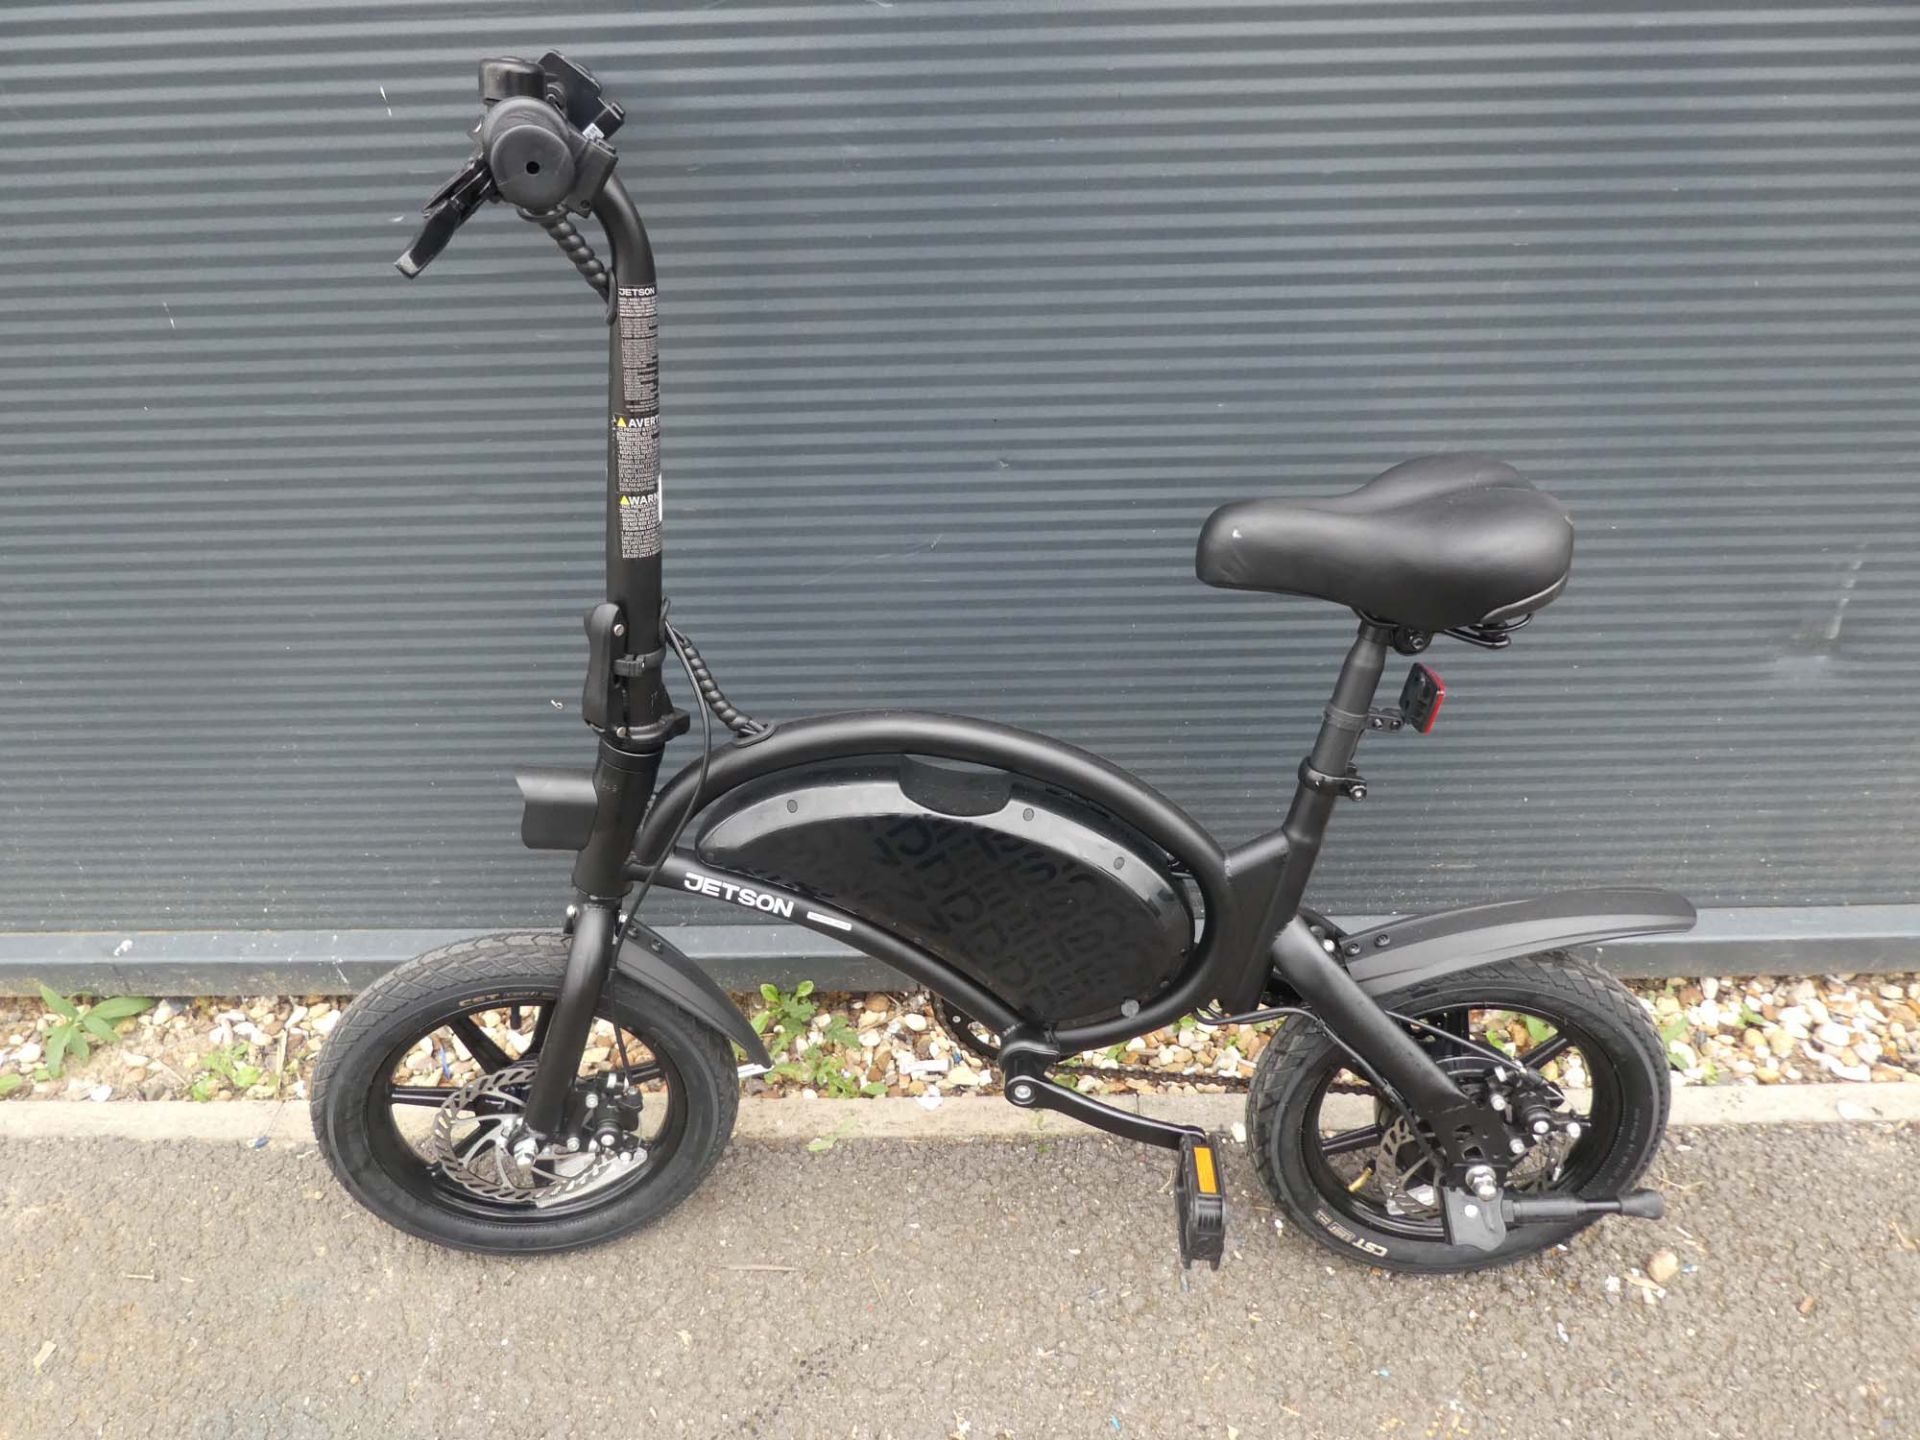 Jetson electric bike with charger